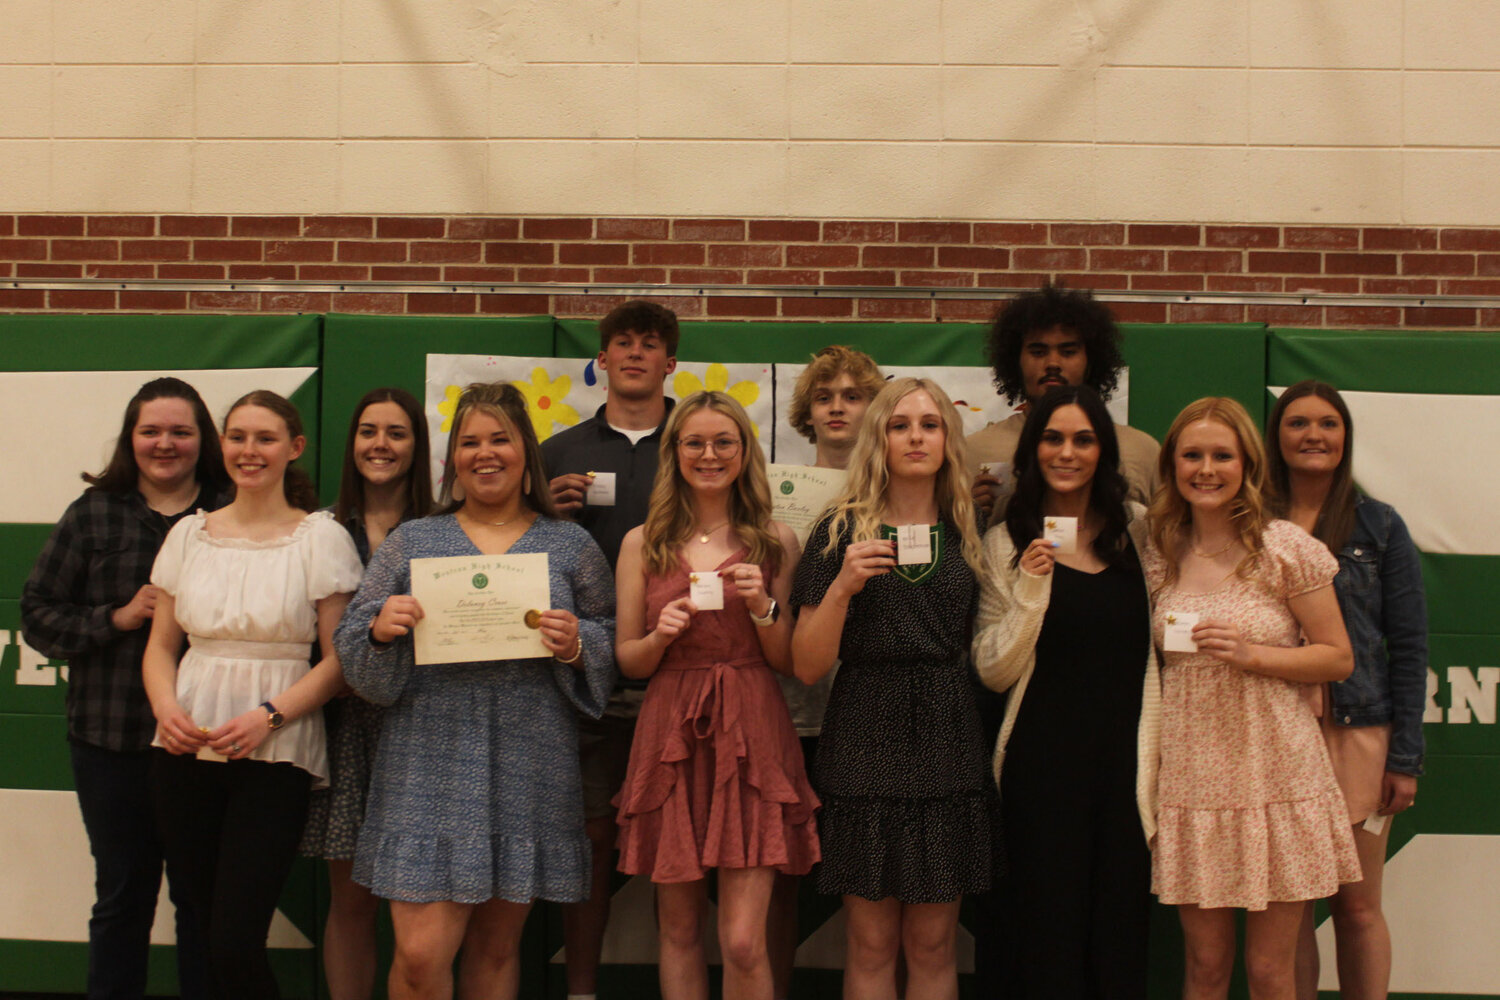 Westran juniors receiving academic awards are from left, front row, Jessica Owens, Delaney Cruse, Kendra Downing, Vallie Schermerhorn, Alesse Fray, and Lauren Harlan. Back row, Mikayla Hickam, Mallory Brown, Brady Hollmann, Treyton Baxley, Tarayle Wallace, and Aliza Prewitt.